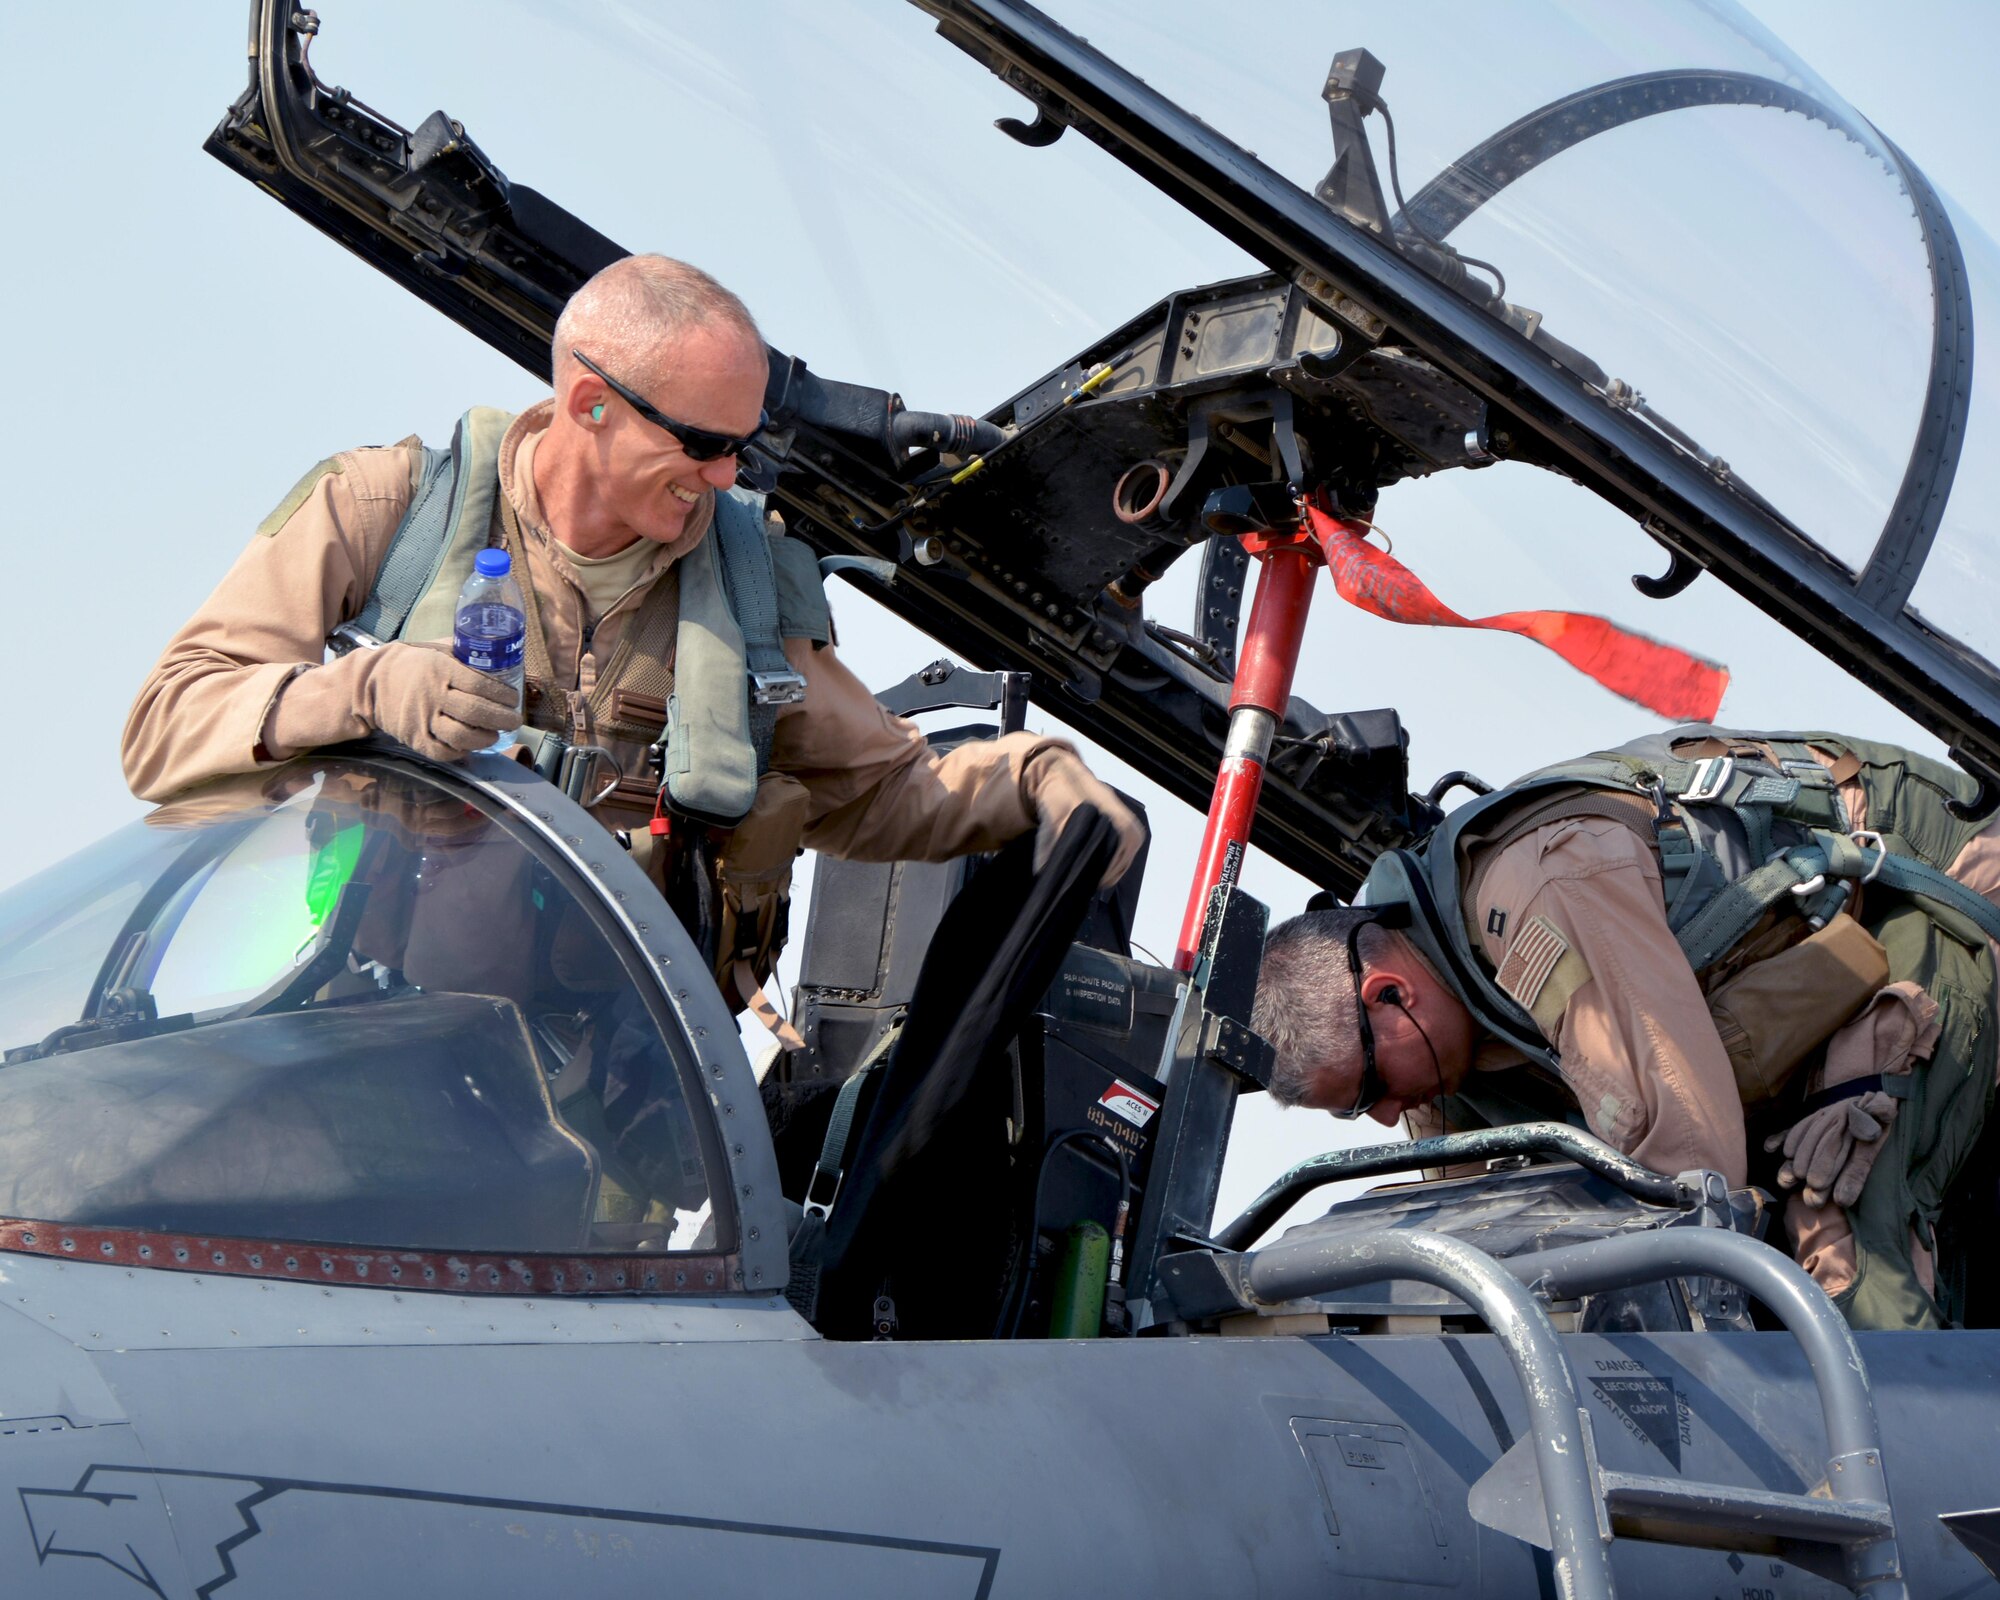 Lt. Col. Brandon, 335th Expeditionary Fighter Squadron commander, and Capt. Matthew, 335th Expeditionary Fighter Squadron weapon systems officer, prepare to disembark from F-15E Strike Eagle #89-0487 after a milestone flight at an undisclosed location, Aug. 16, 2016. The jet attained 12,000 flying hours and Brandon achieved 3,000 flying hours during the same flight. (U.S. Air Force photo by Staff Sgt. Samantha Mathison)